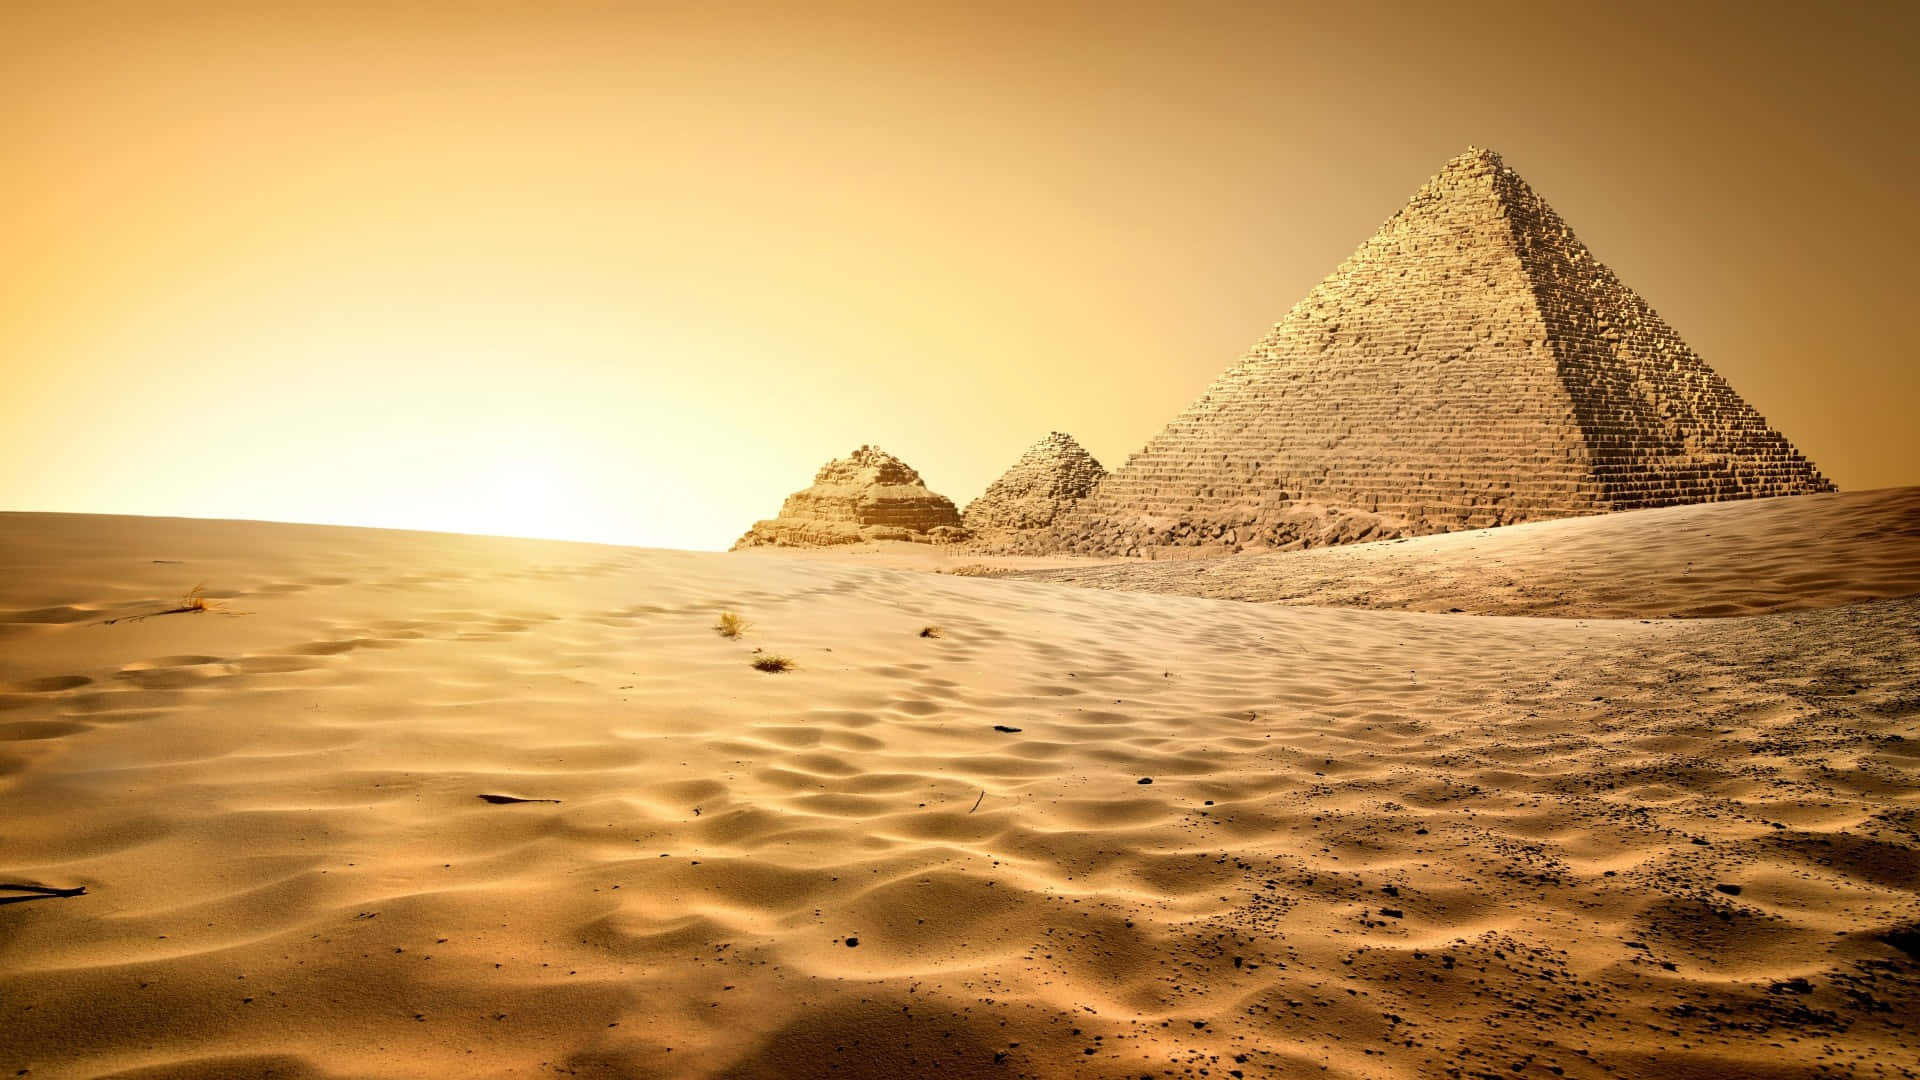 A Desert With Pyramids And Sand